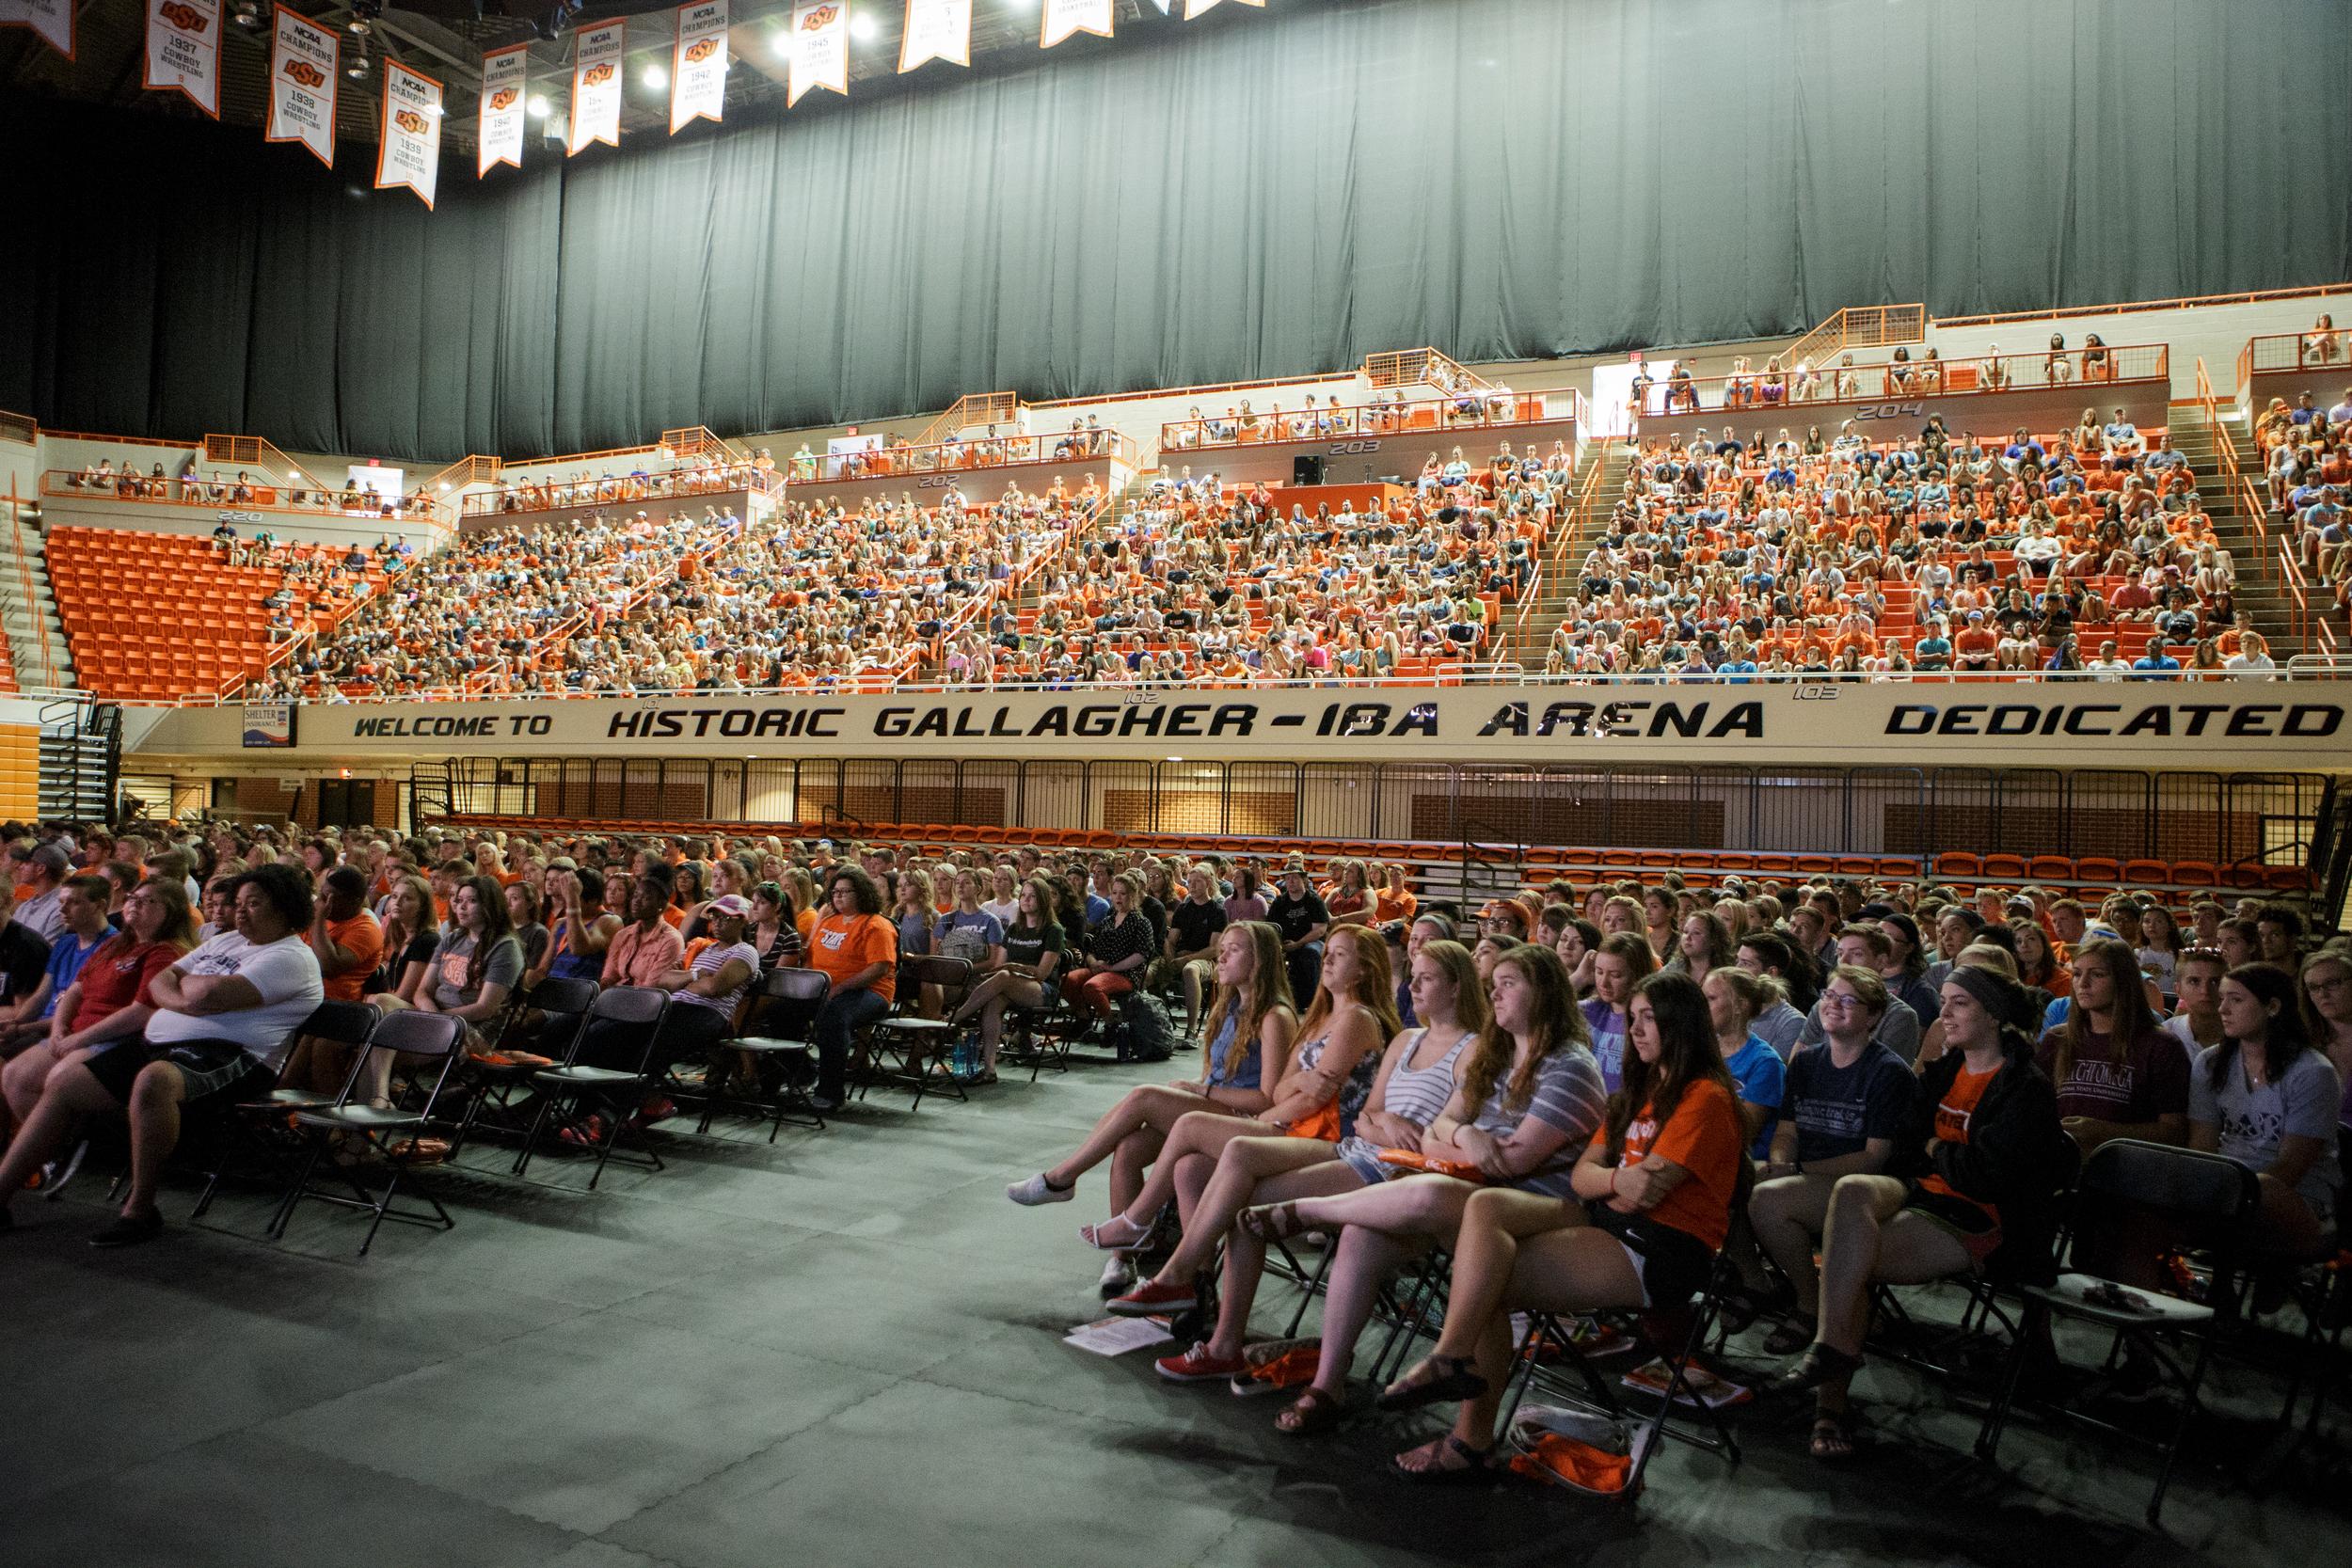 Oklahoma State University's basketball stadium, Gallagher Iba Arena filled with students who are listening to a speaker